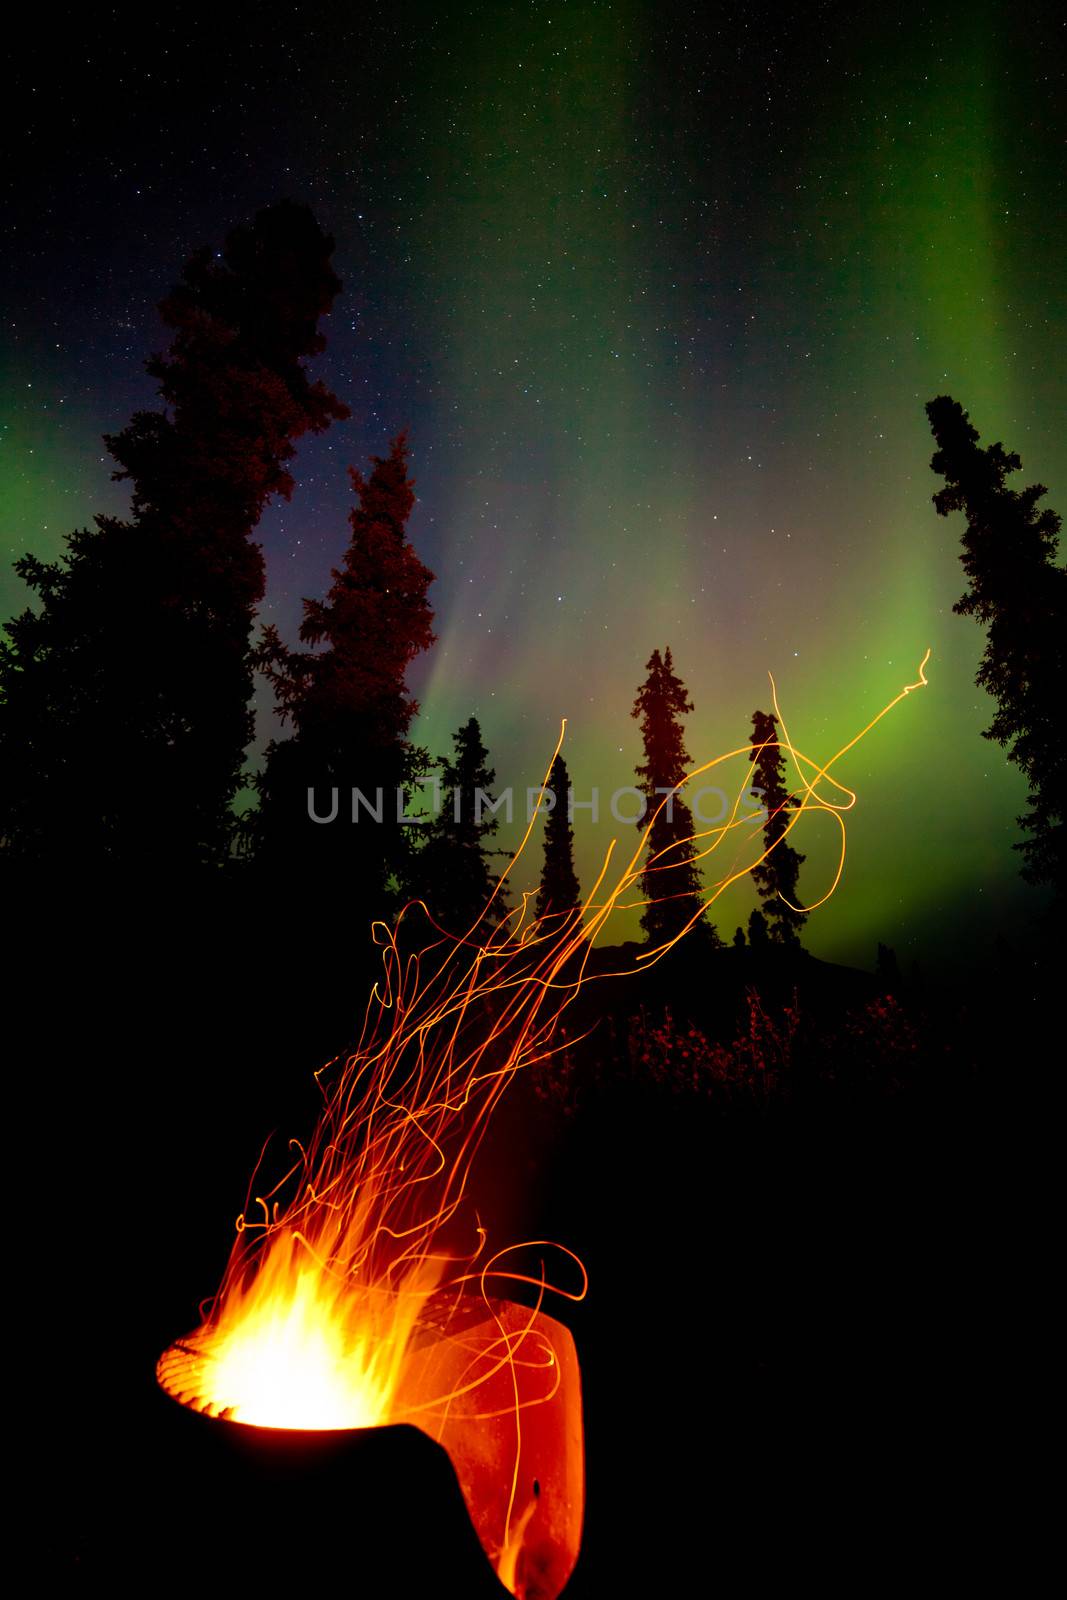 Open campfire burning hot in cast iron fire pit with spark trails flying off into boreal forest taiga under northern lights, Aurora borealis